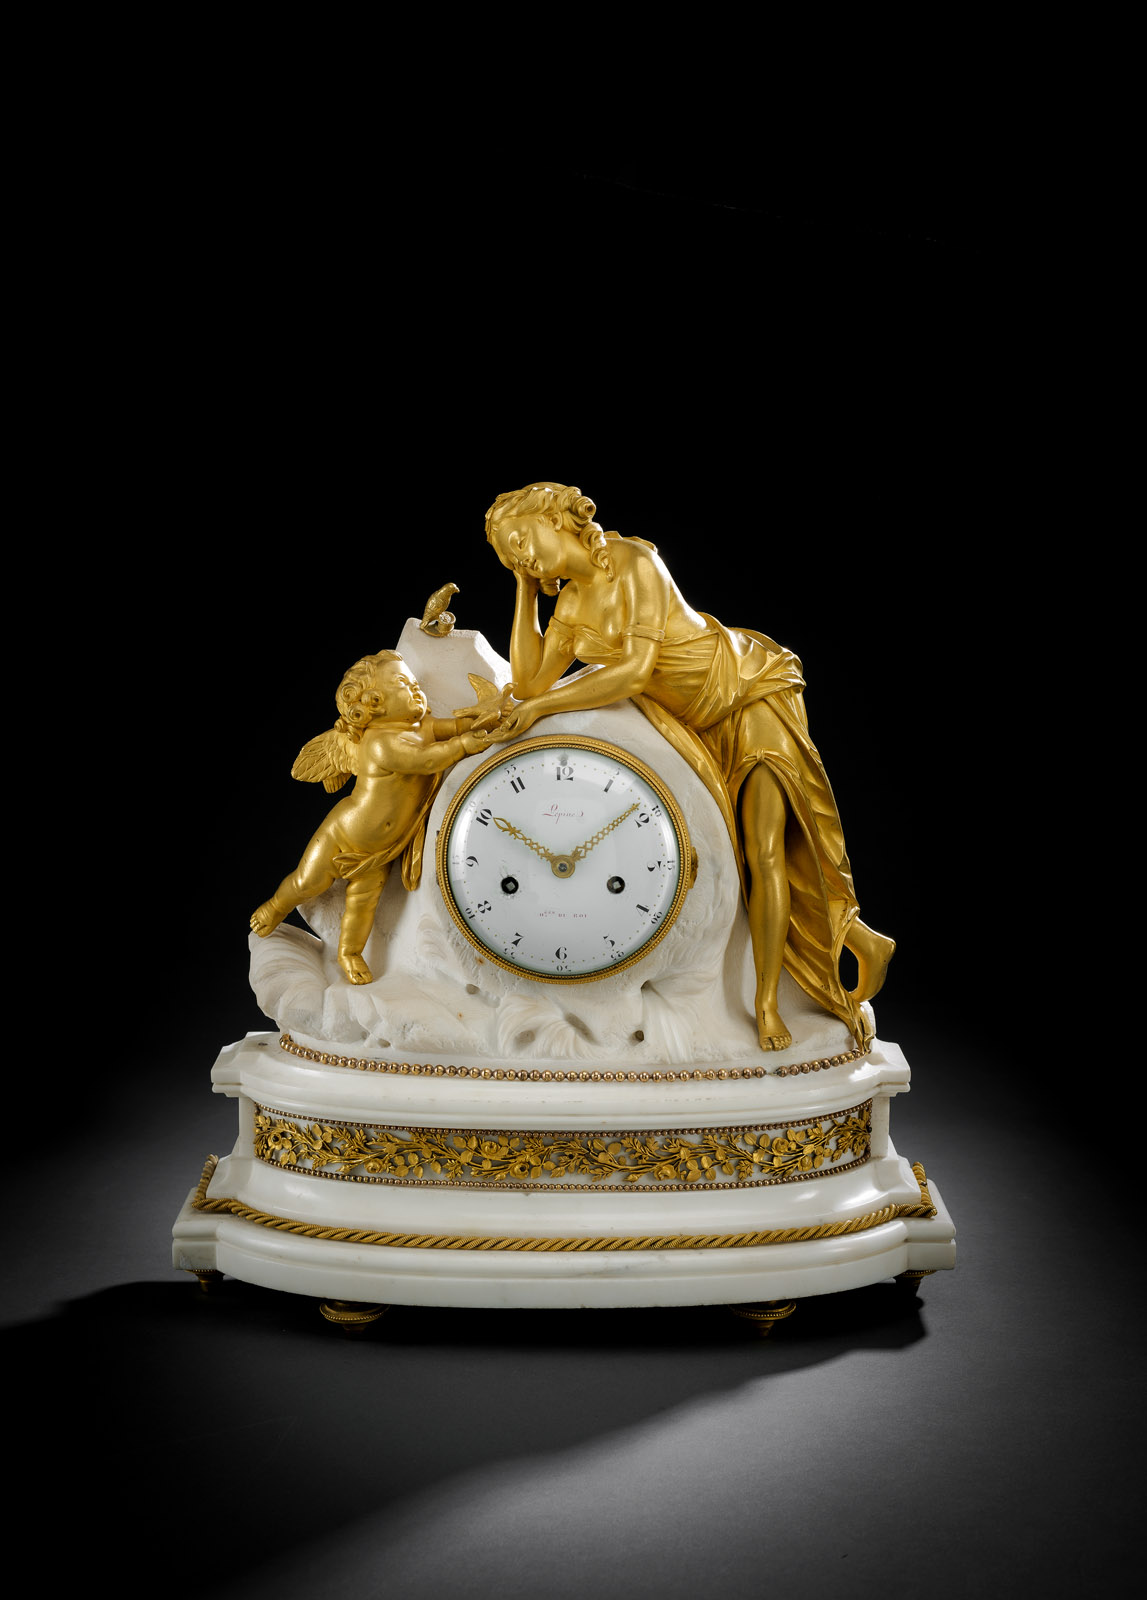 On a naturalized Carrara marble base, a fully plastic representation of Cupid and Psyche made of fire-gilded bronze, filigree base relief and disc feet. Bulged, white enamel dial with Arabic numerals and fine, ornate hands. Signed 